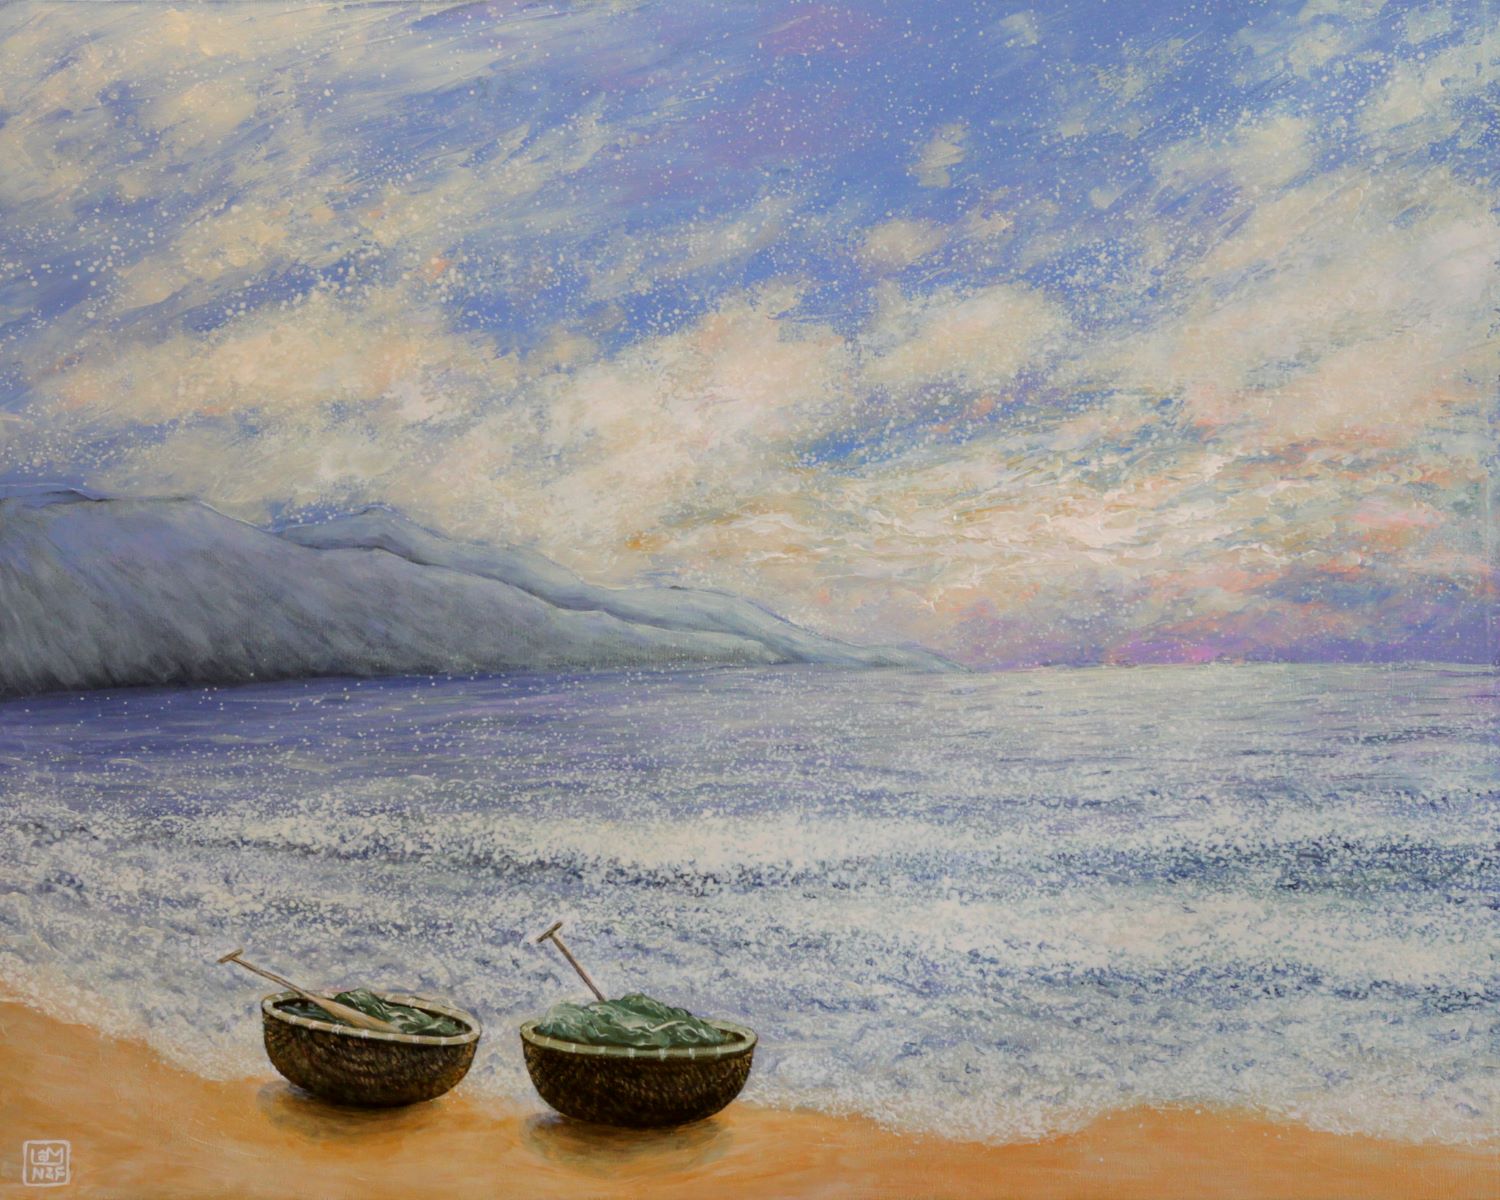 The Sea at Dawn - Vietnamese Acrylic Painting by Artist Nguyen Lam